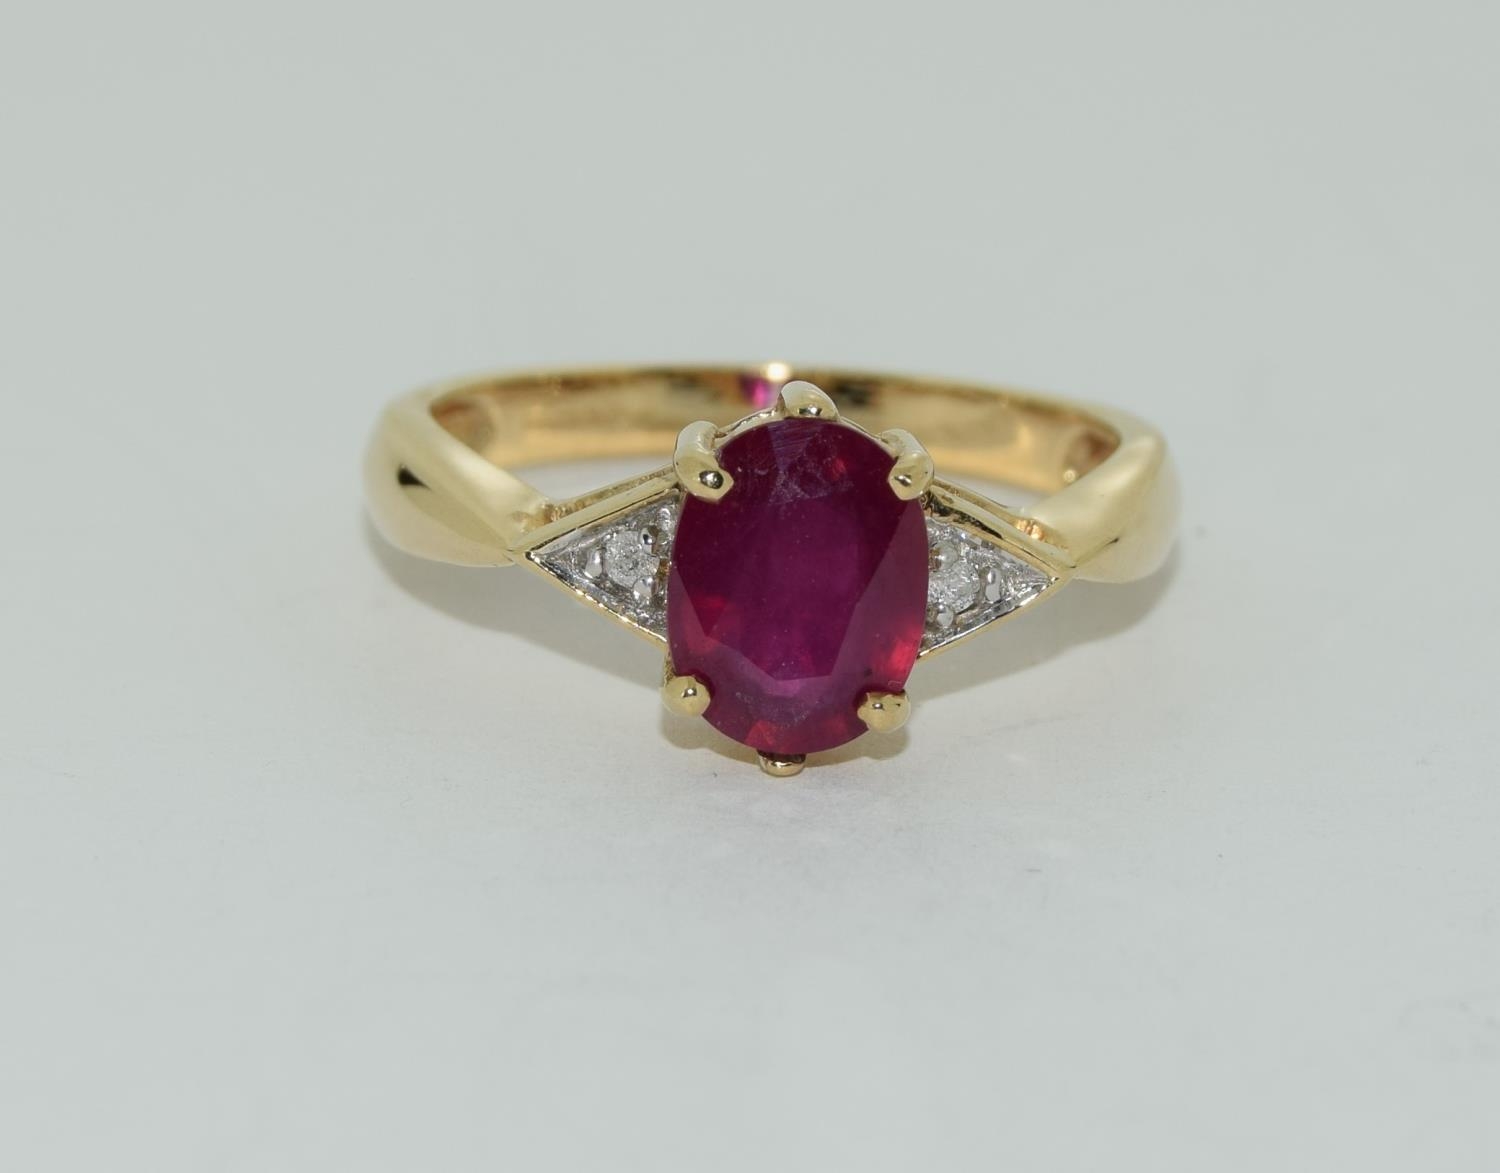 9ct gold ladies diamond and ruby ring approx 1.2ct ruby size N